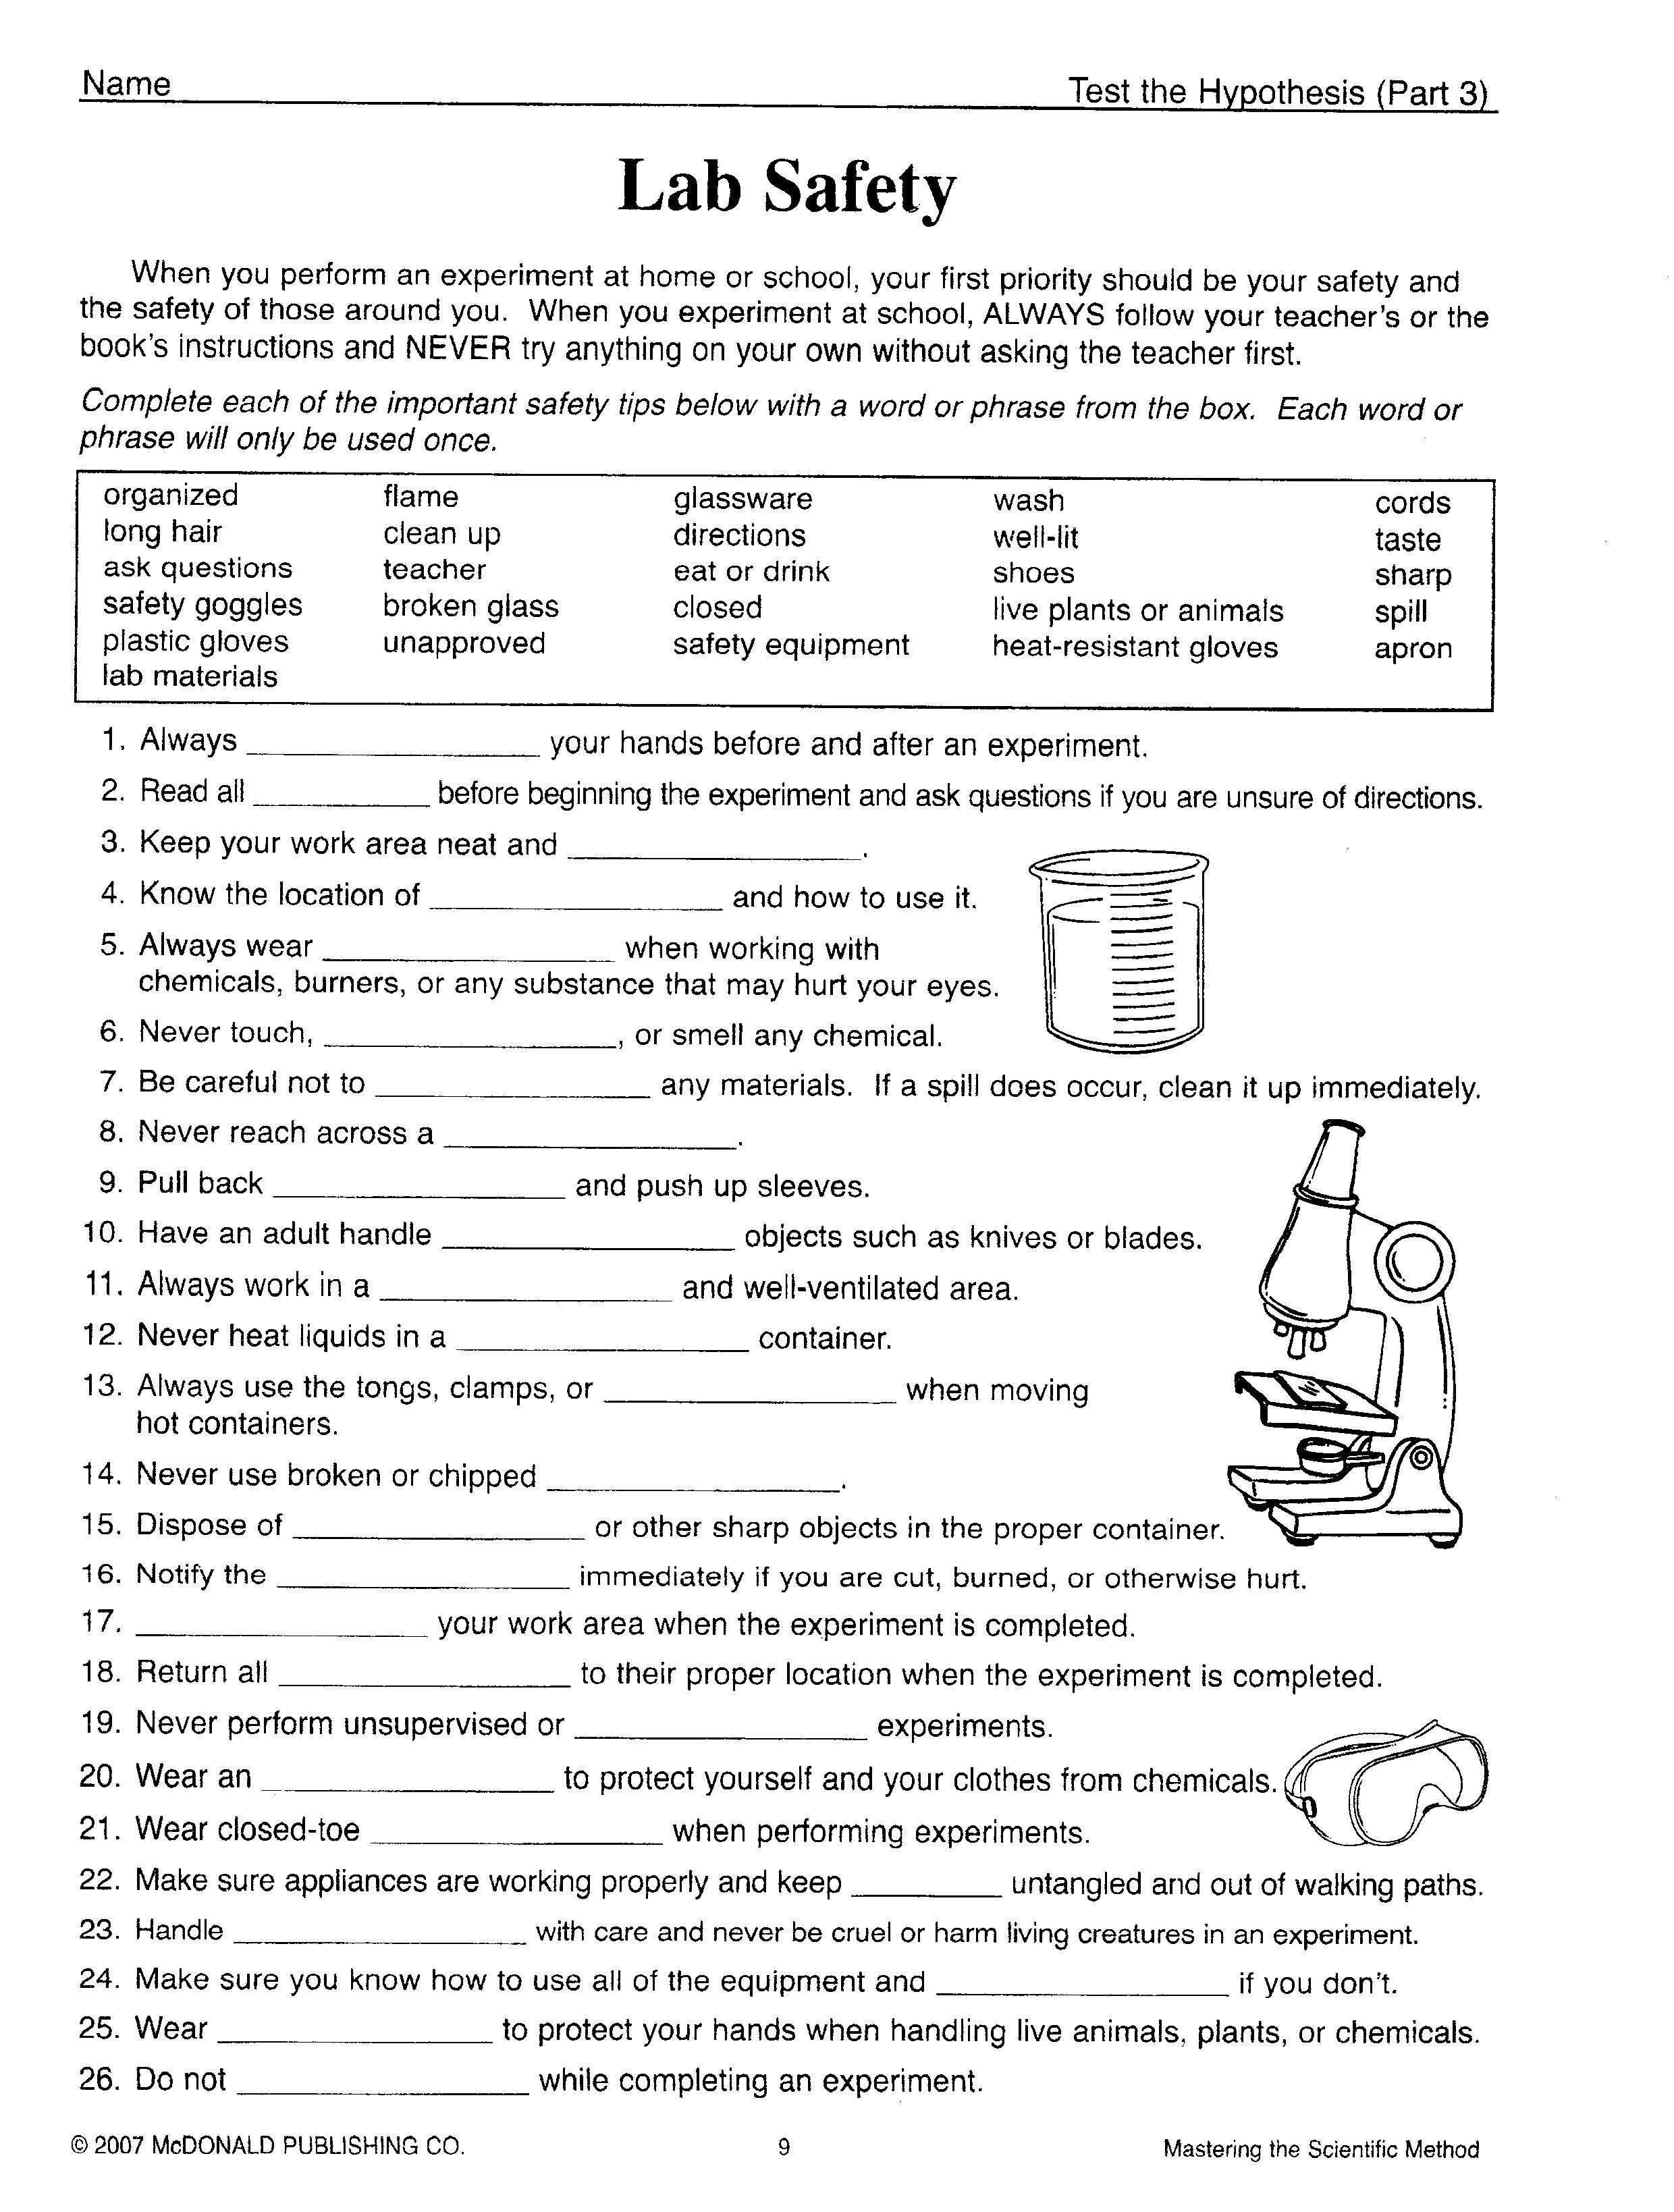 Mythbusters Penny Drop Worksheet Answers Luxury Worksheets Sample Inside Mythbusters Penny Drop Worksheet Answers